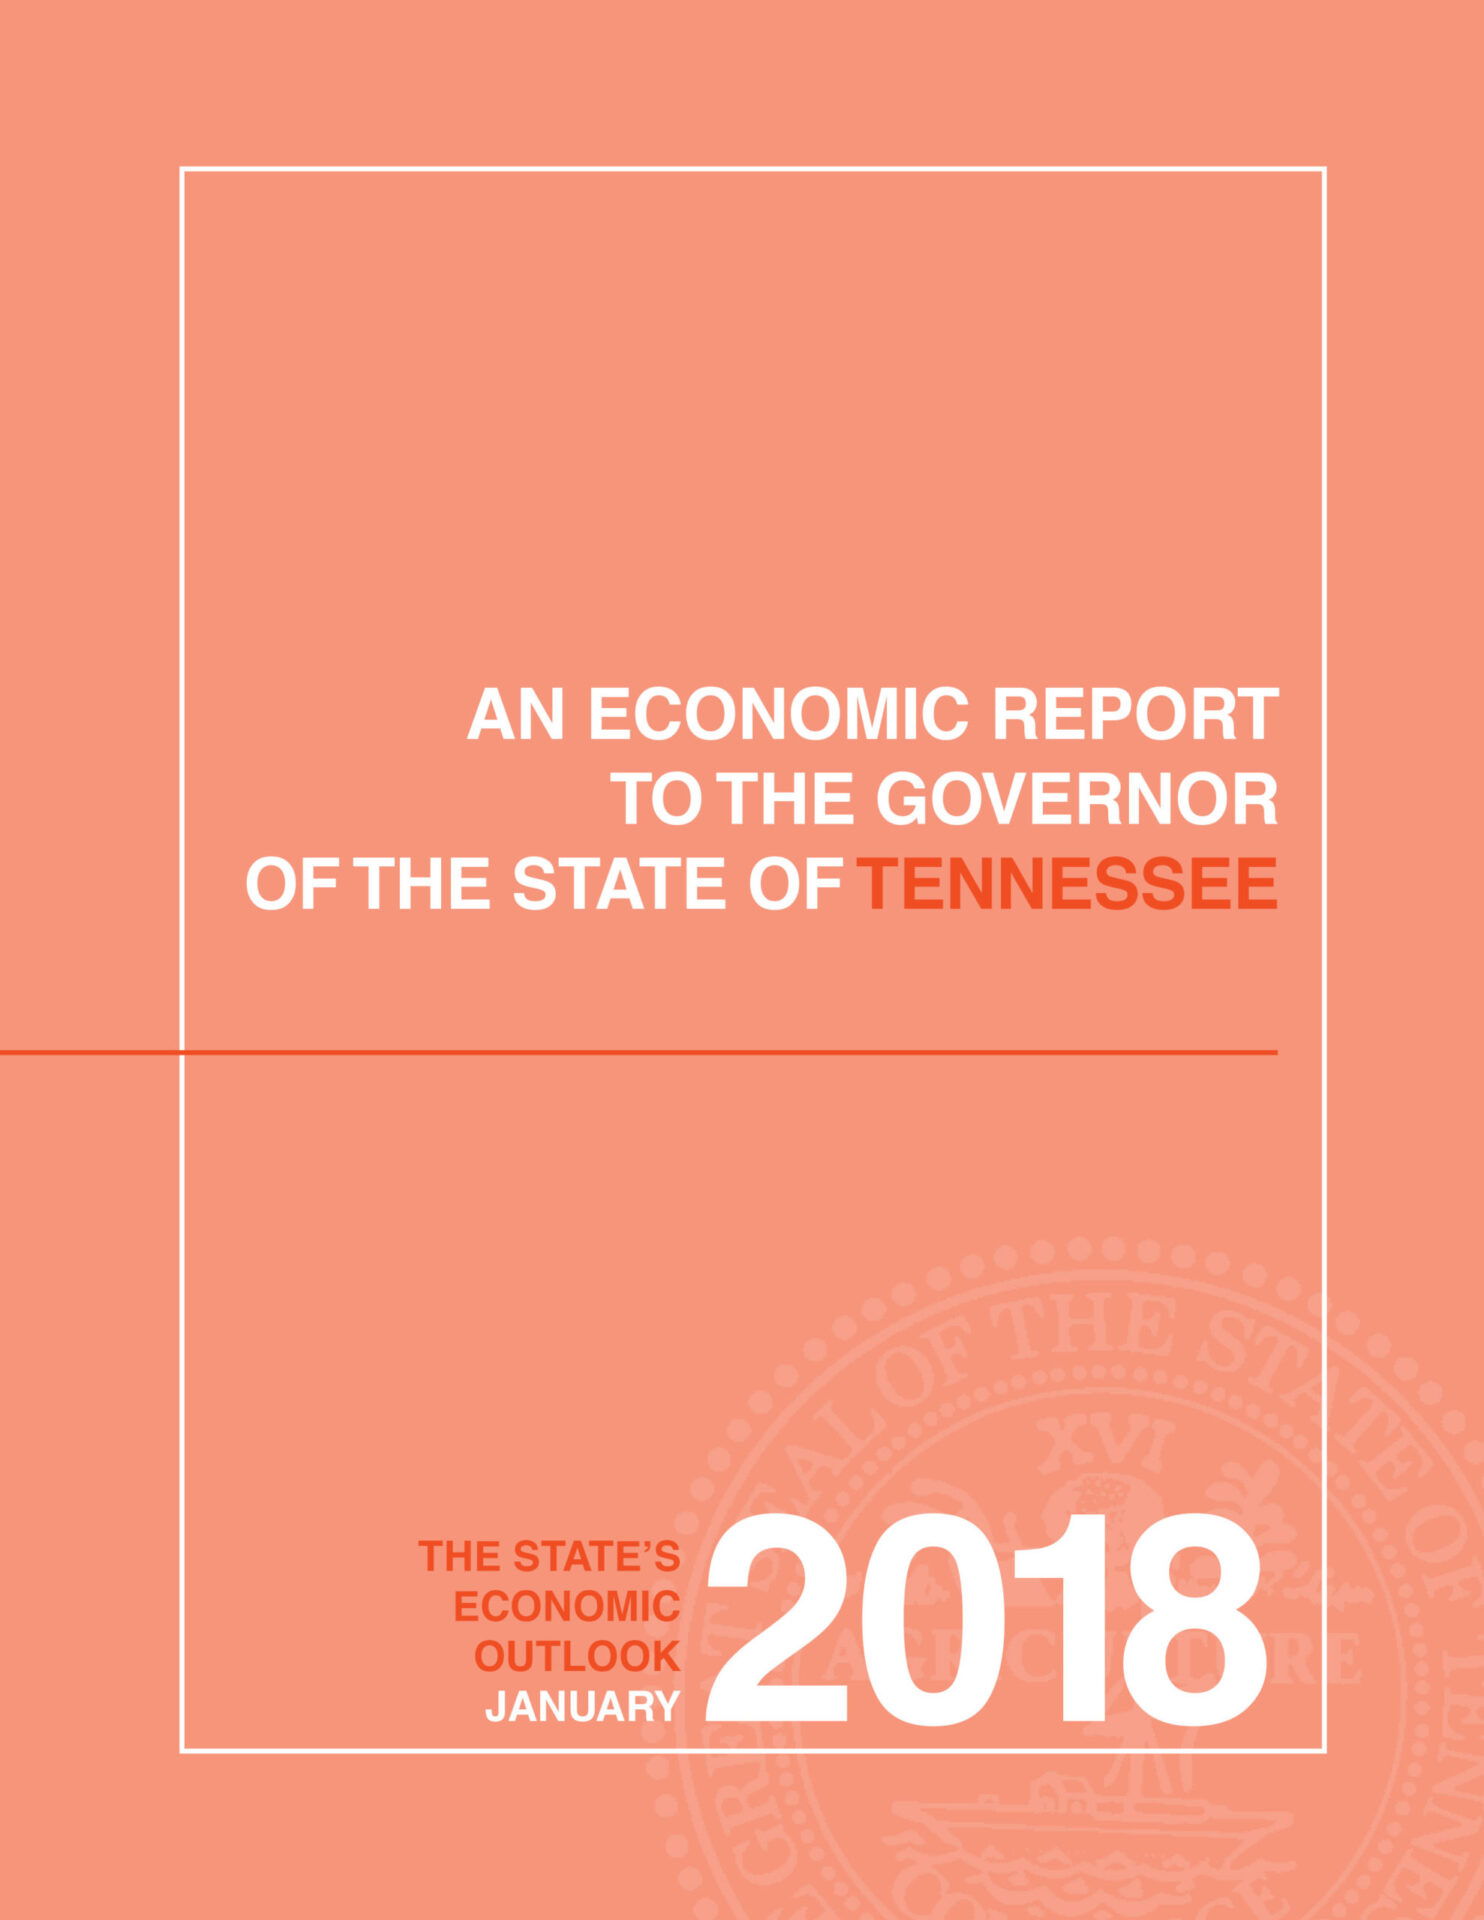 An Economic Report to the Governor of the State of Tennessee, 2018